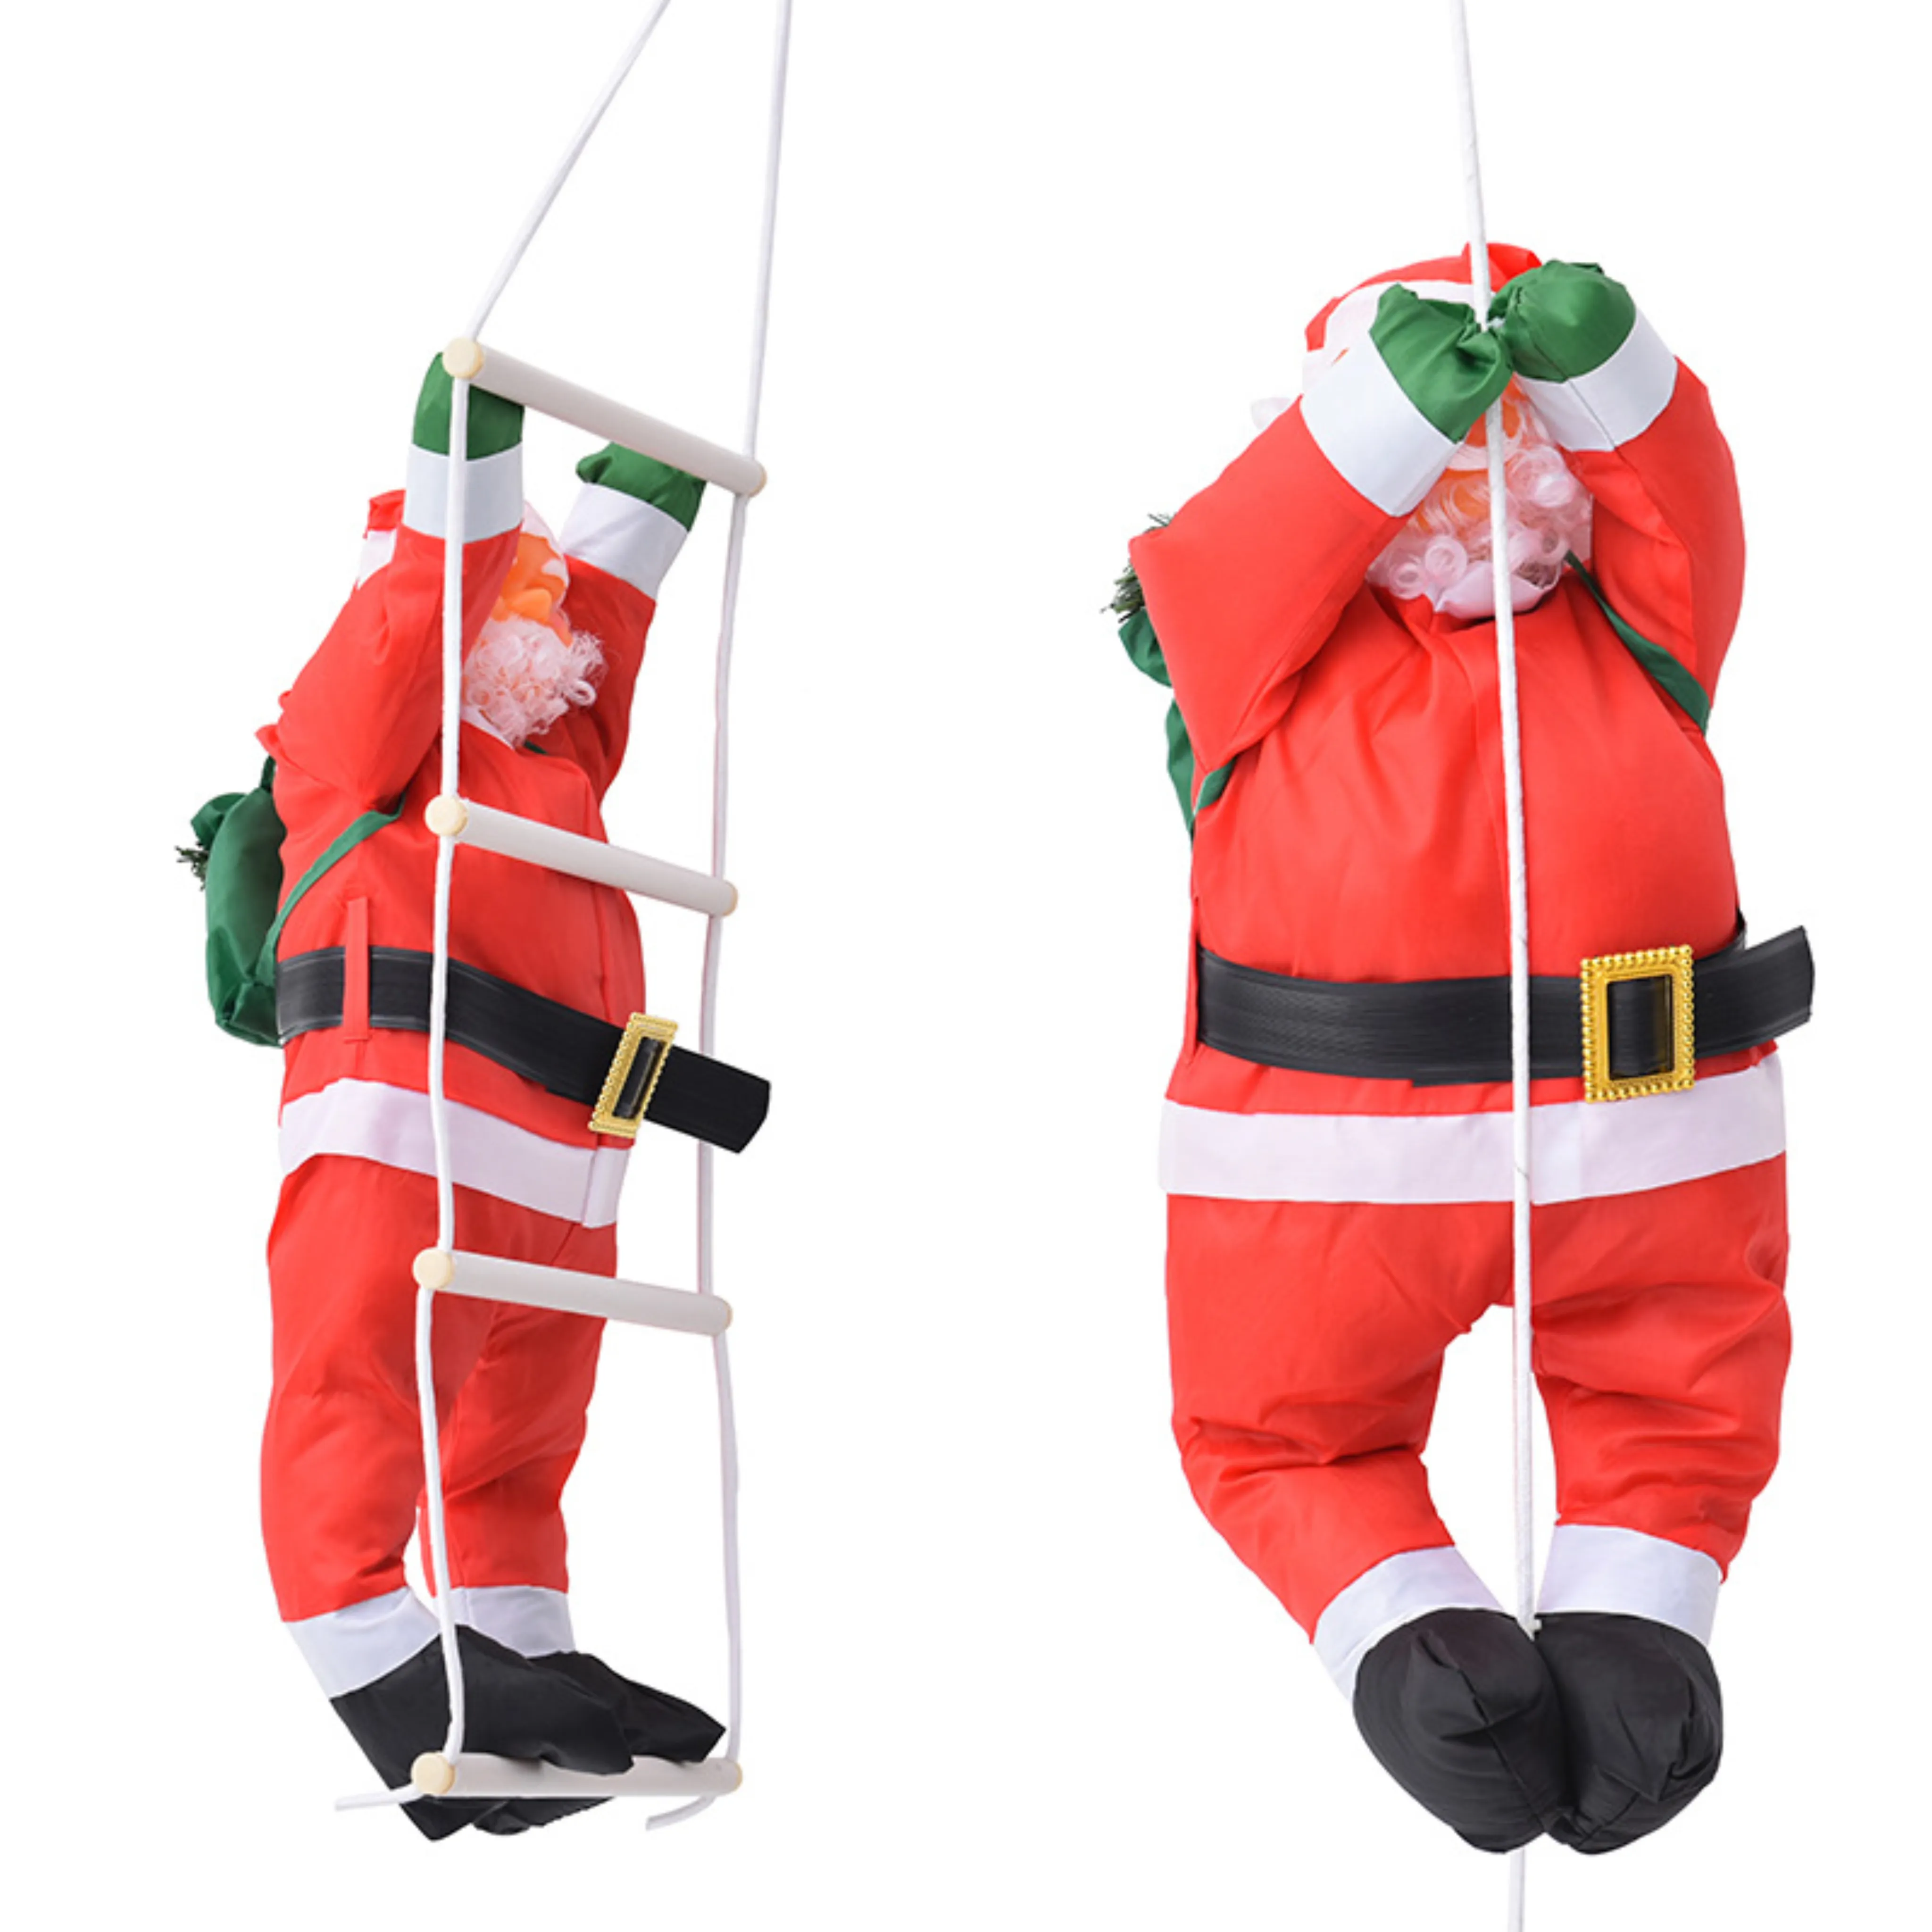 24" H Cute Climbing Santa Claus On Rope Ladder Indoor Outdoor Christmas Tree Hanging Decorations Party Wall Window Decoration